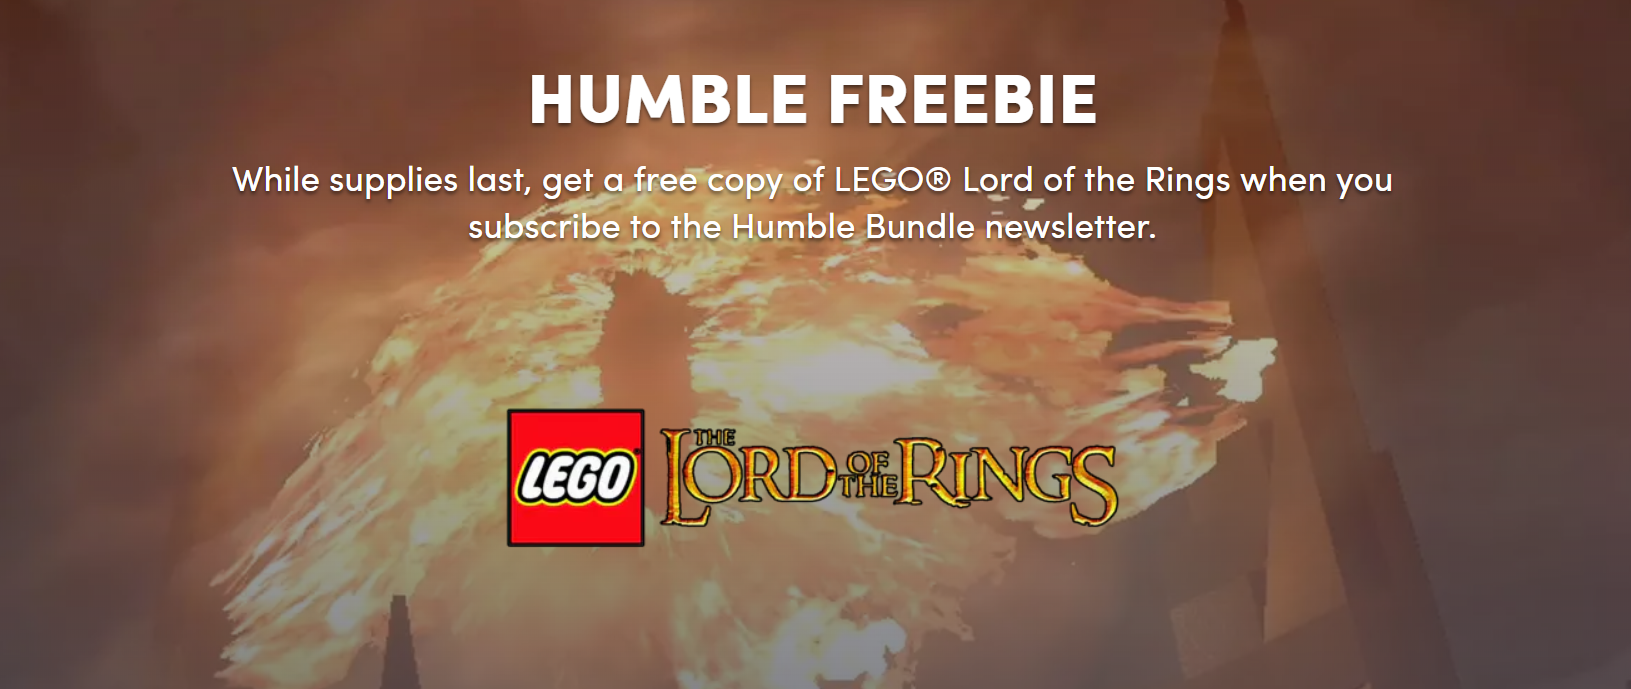 lego the lord of the rings gratis